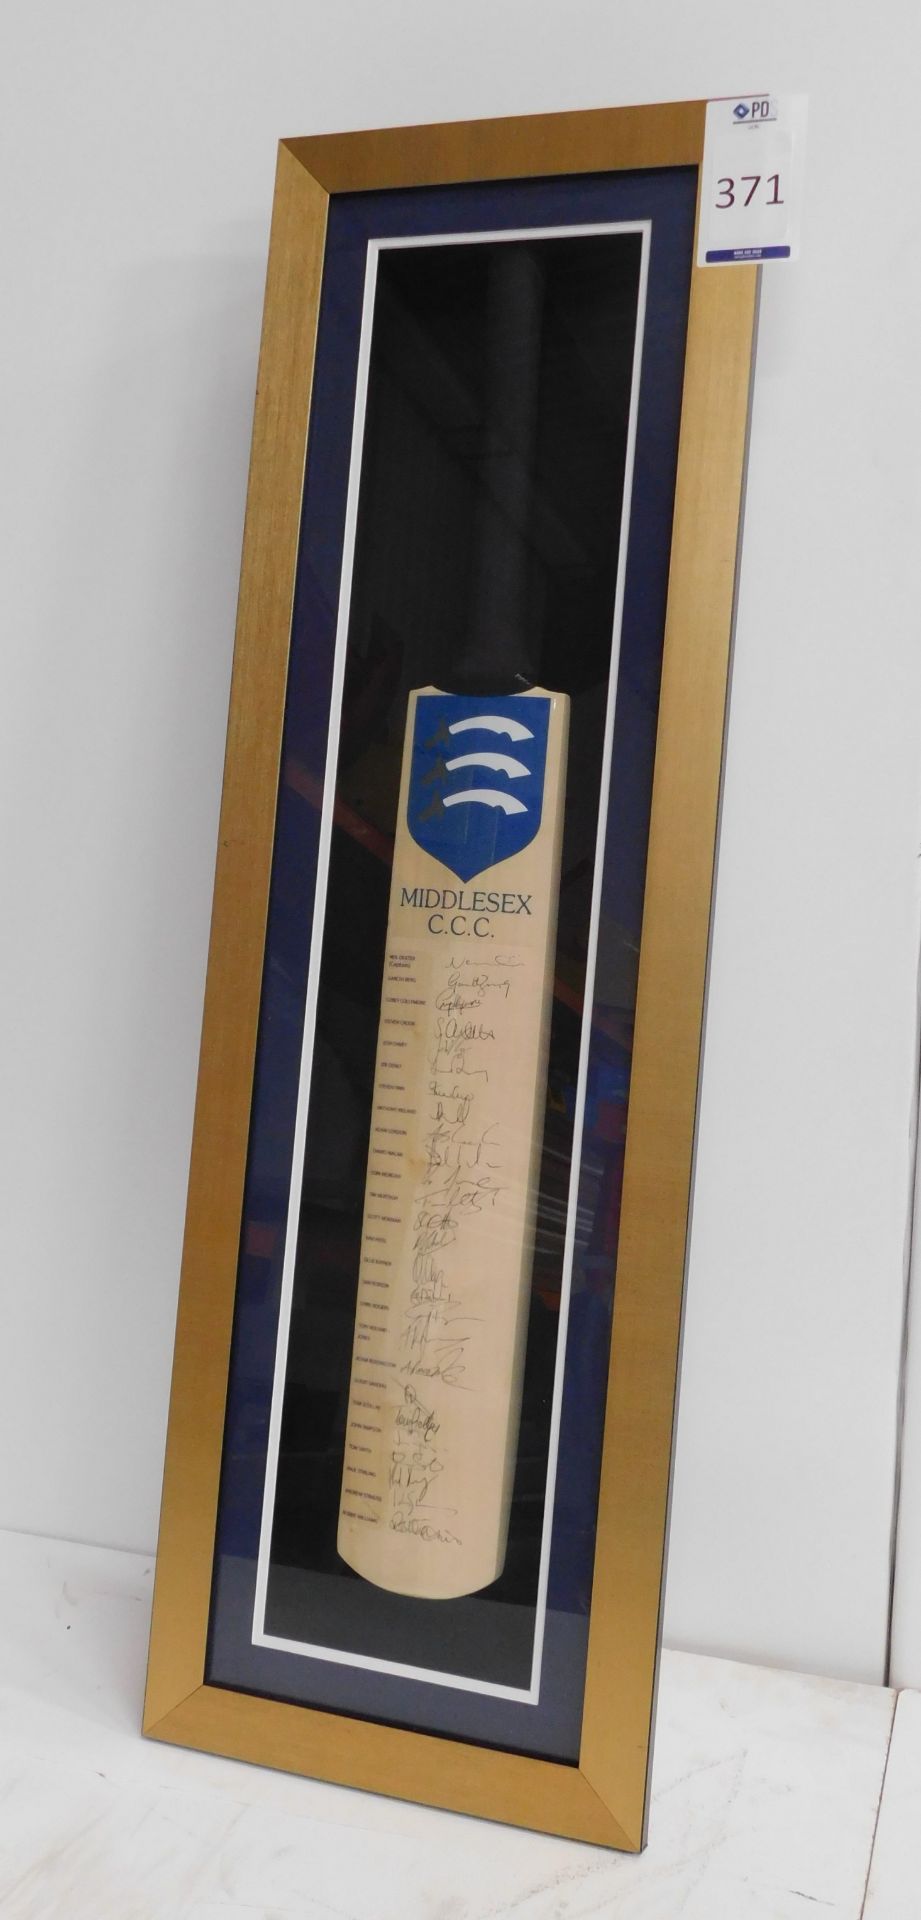 Middlesex CCC Signed Cricket Bat in Presentation Case (Overall size: 101cm x 32cm) (Located: